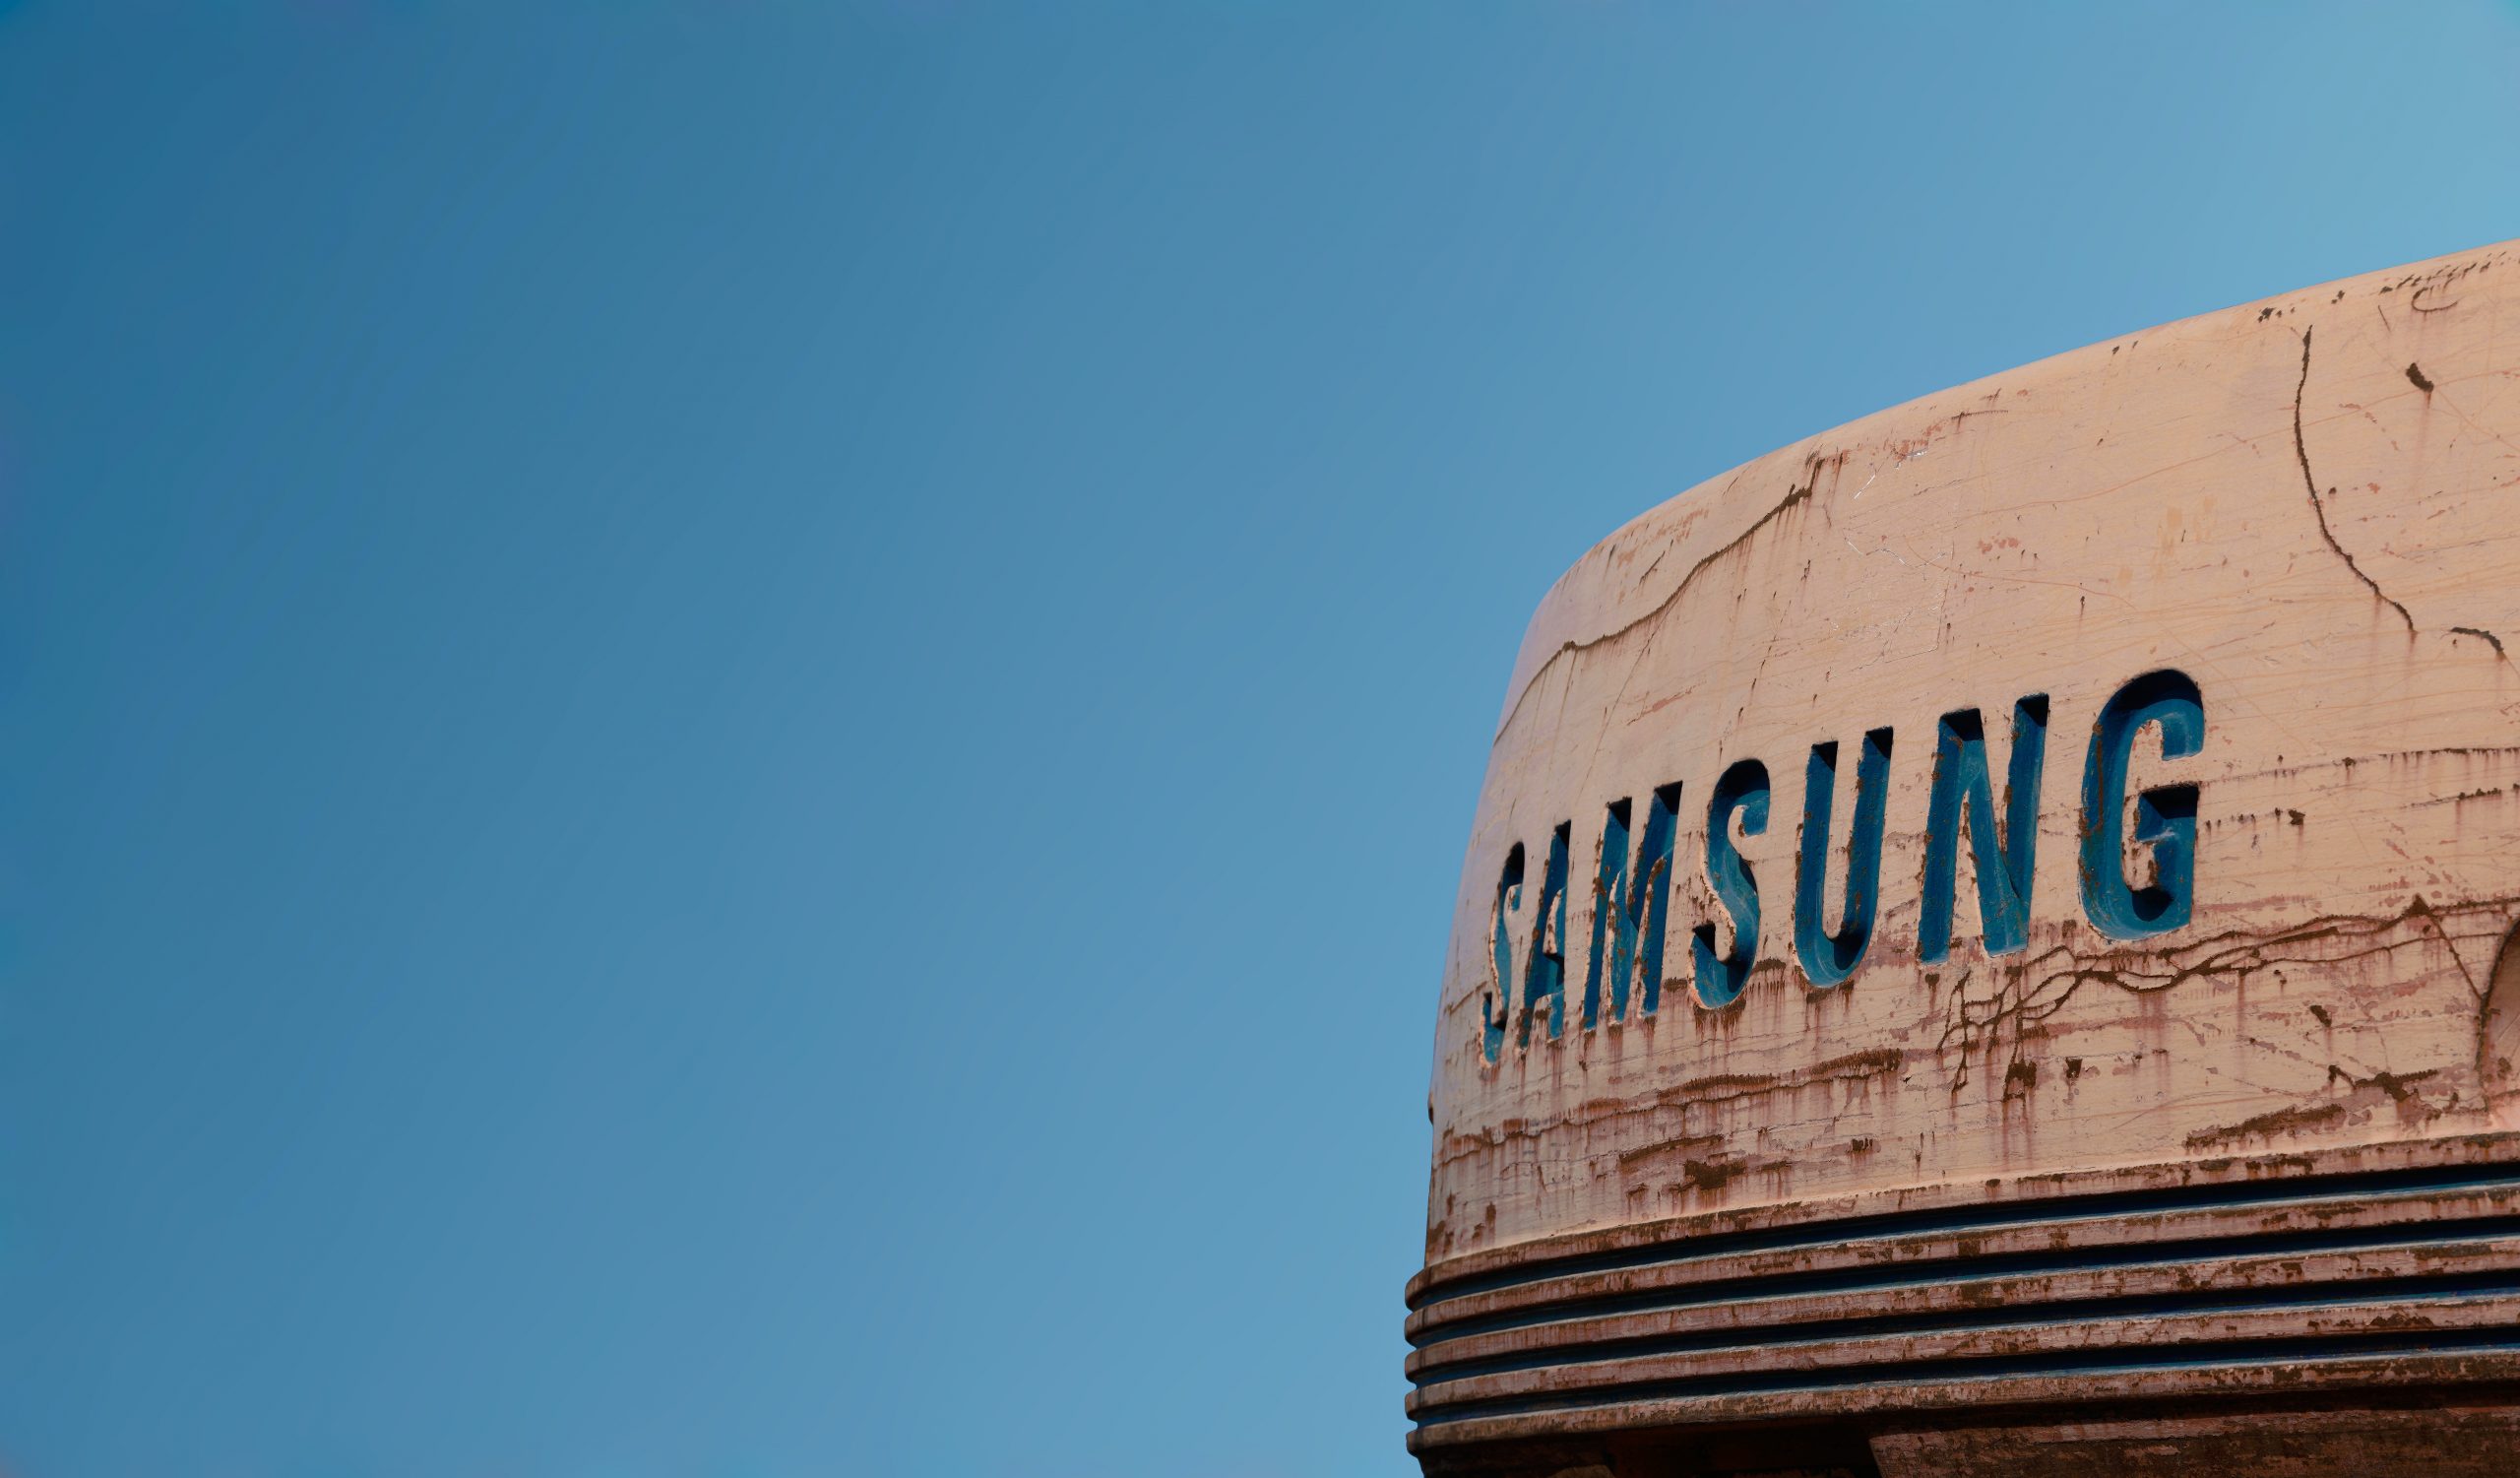  Samsung’s best quarterly revenue in three years is fueled by rising chip prices!